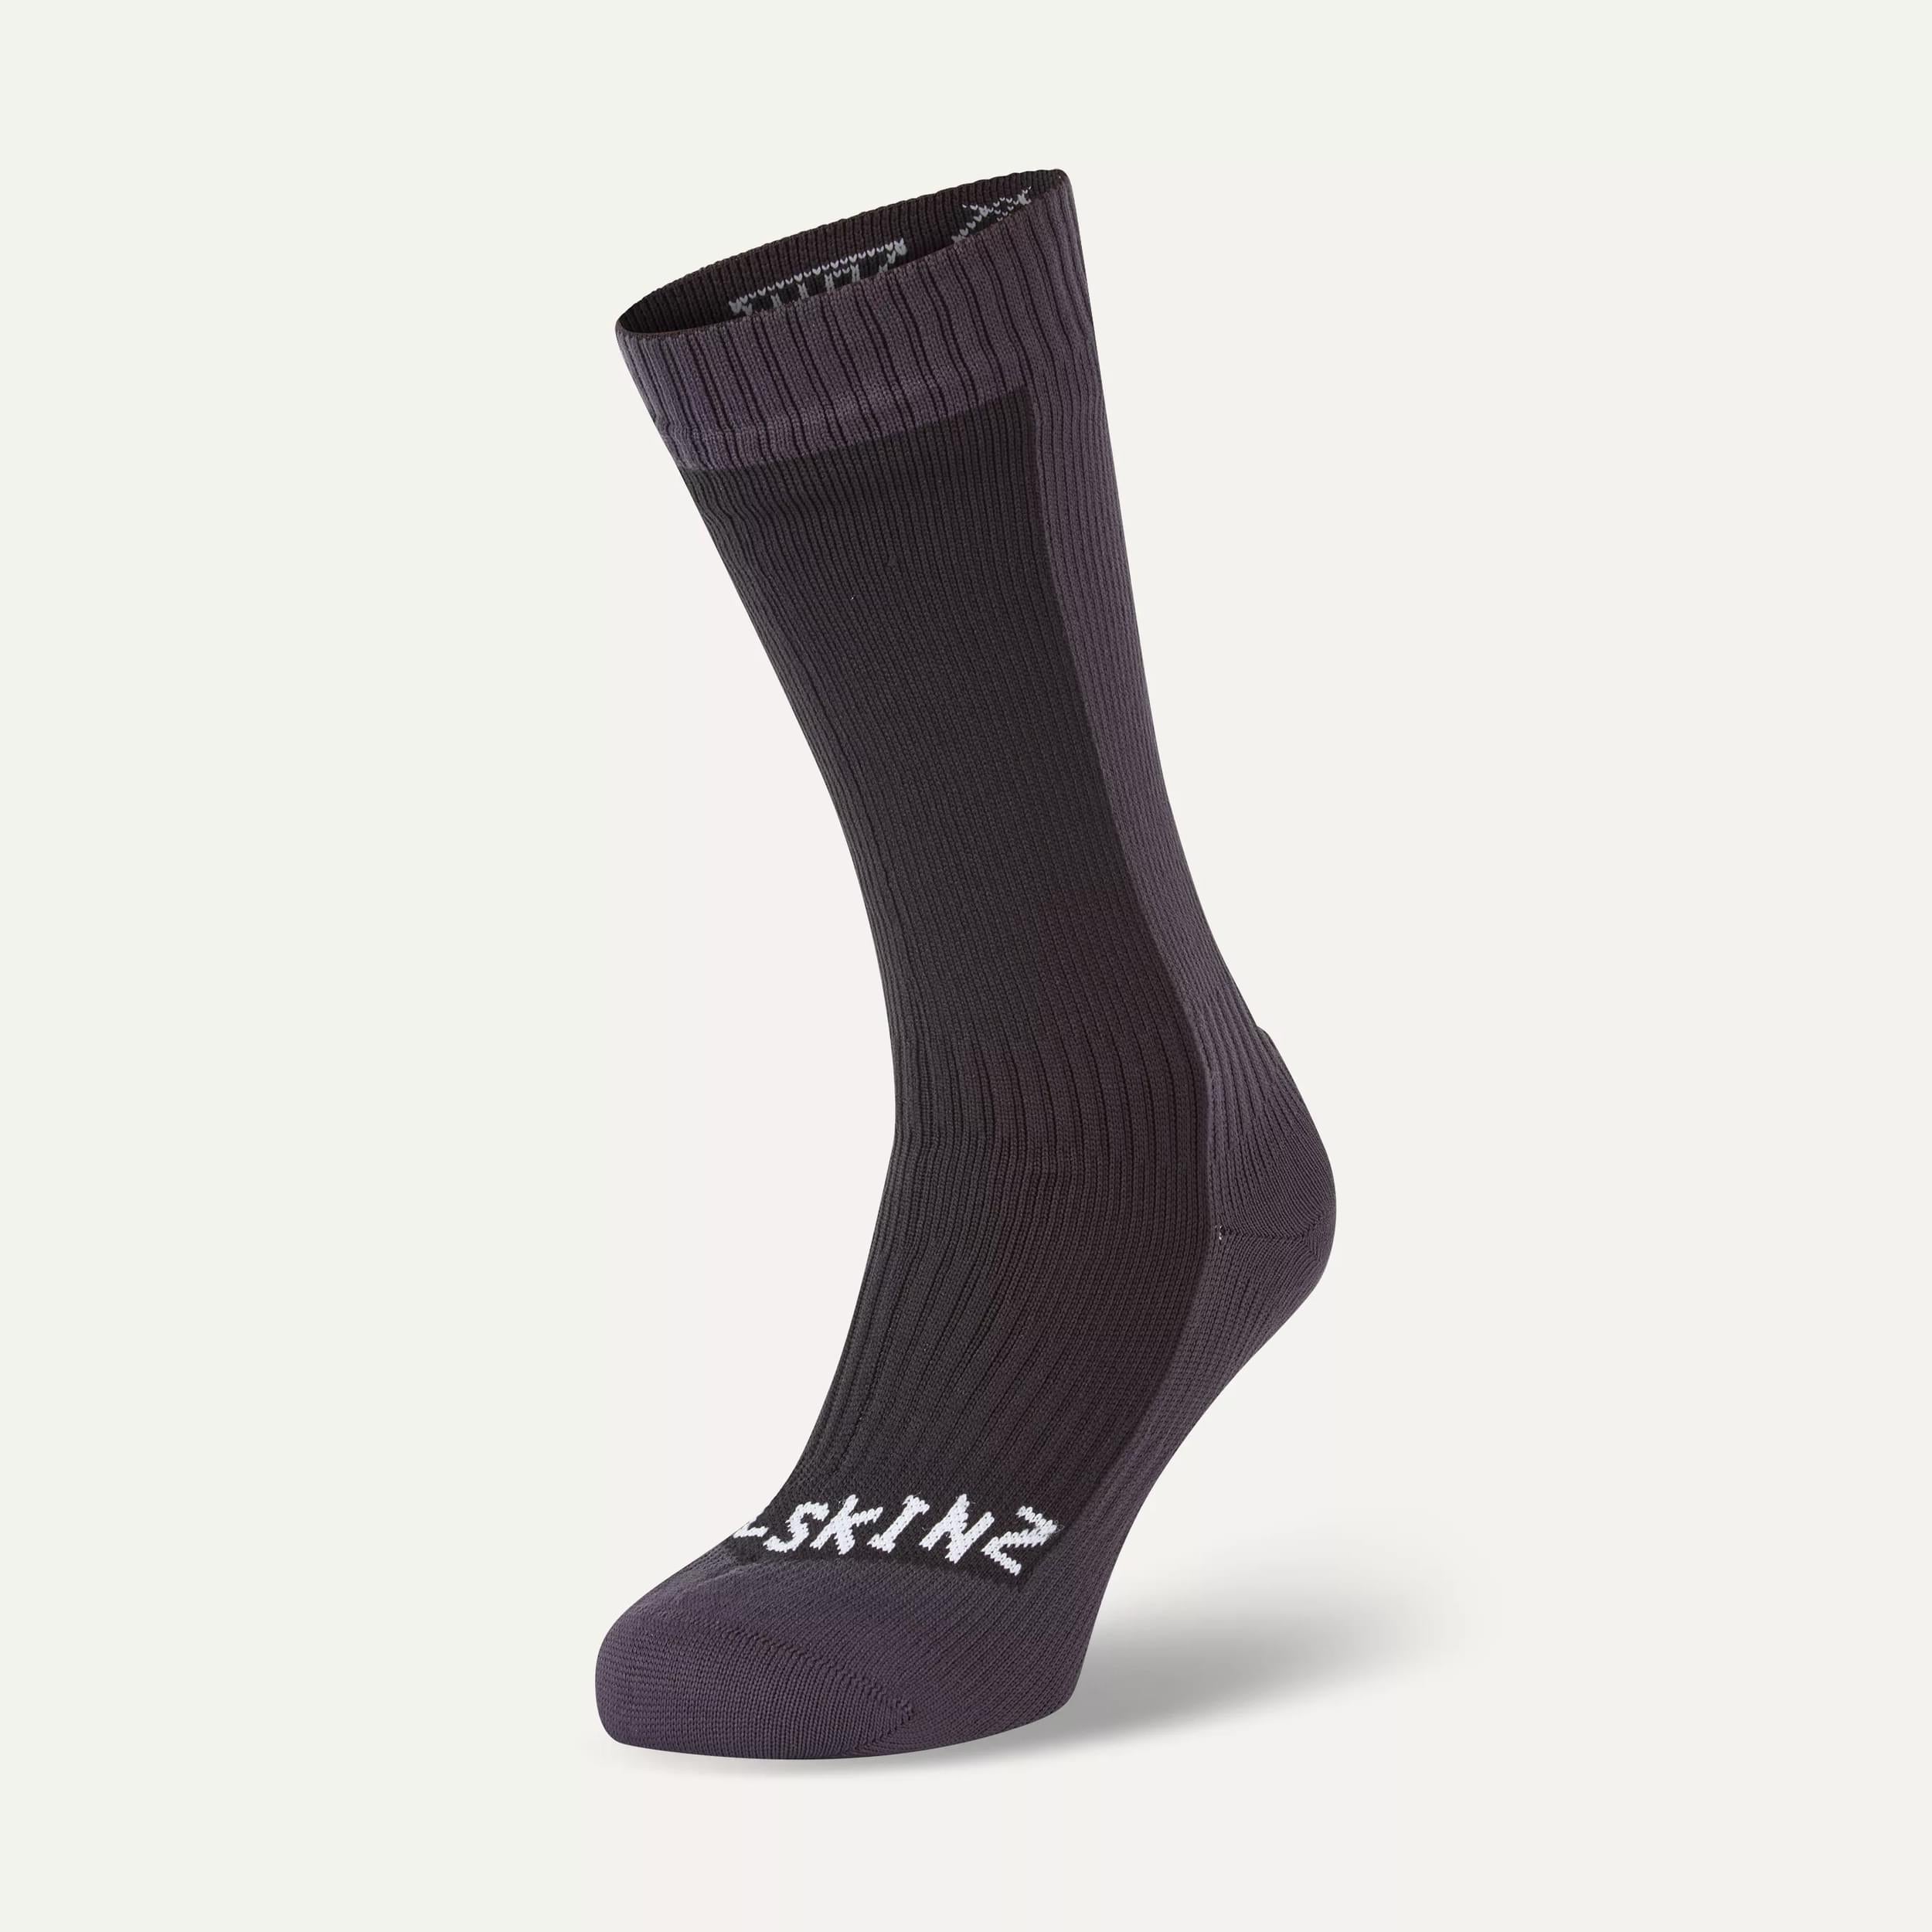 Stanfield - Waterproof Extreme Cold Weather Mid Length Sock 